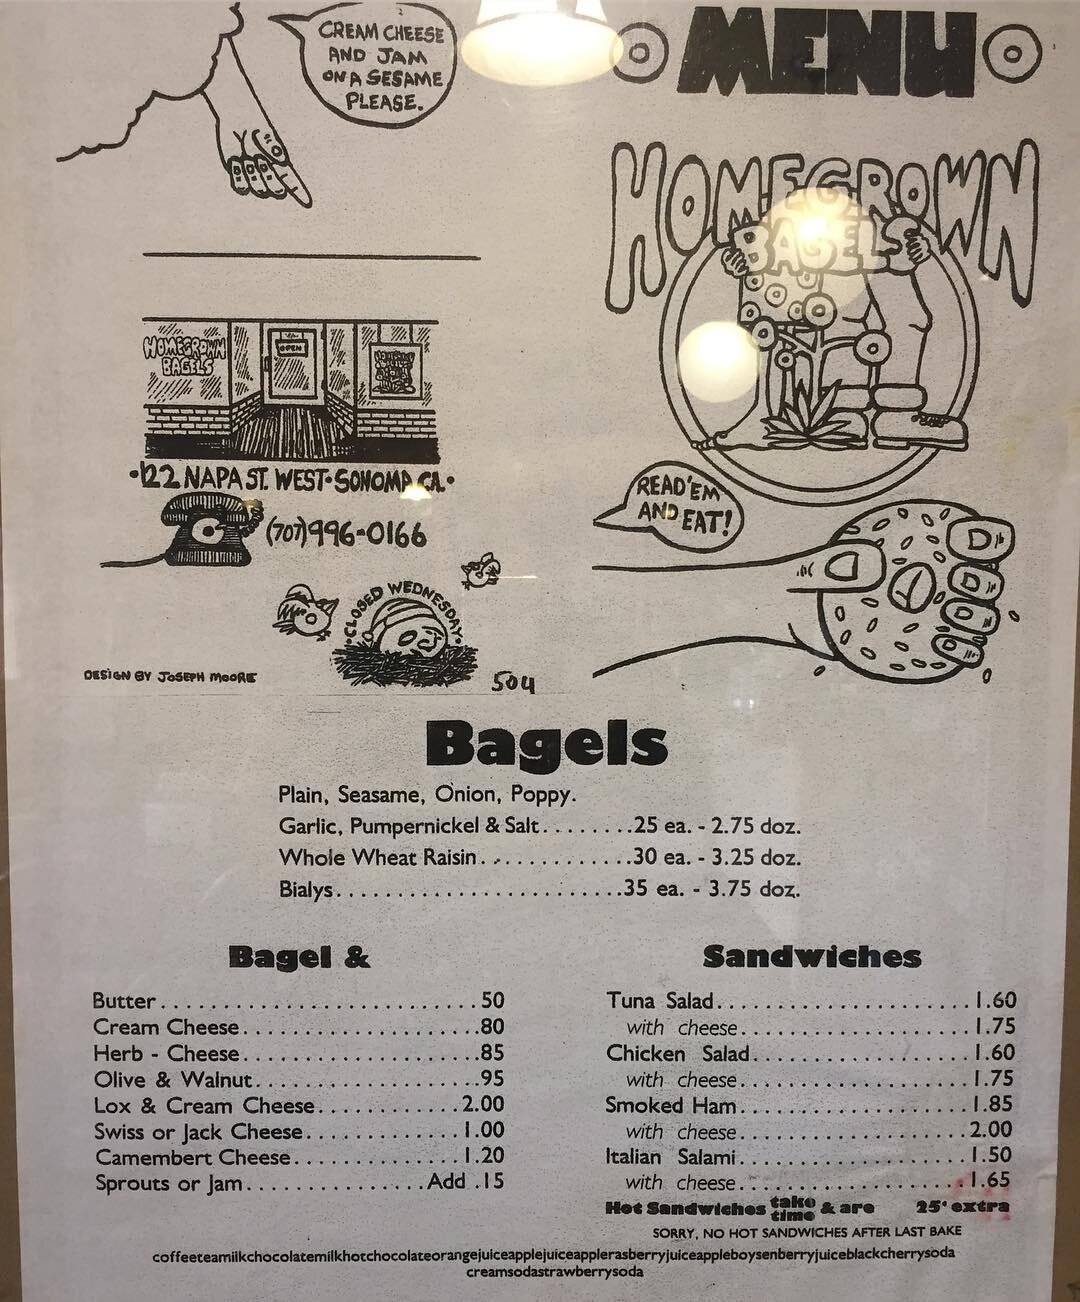 A little #throwbackthursday with one of our original menus! The prices may have changed with the times, but the bagels have not! 40 years proudly serving Sonoma Valley! #homegrownbagels #thebagelshop #tbt #sonomavalley #valleyofthemoon #nomapride #so